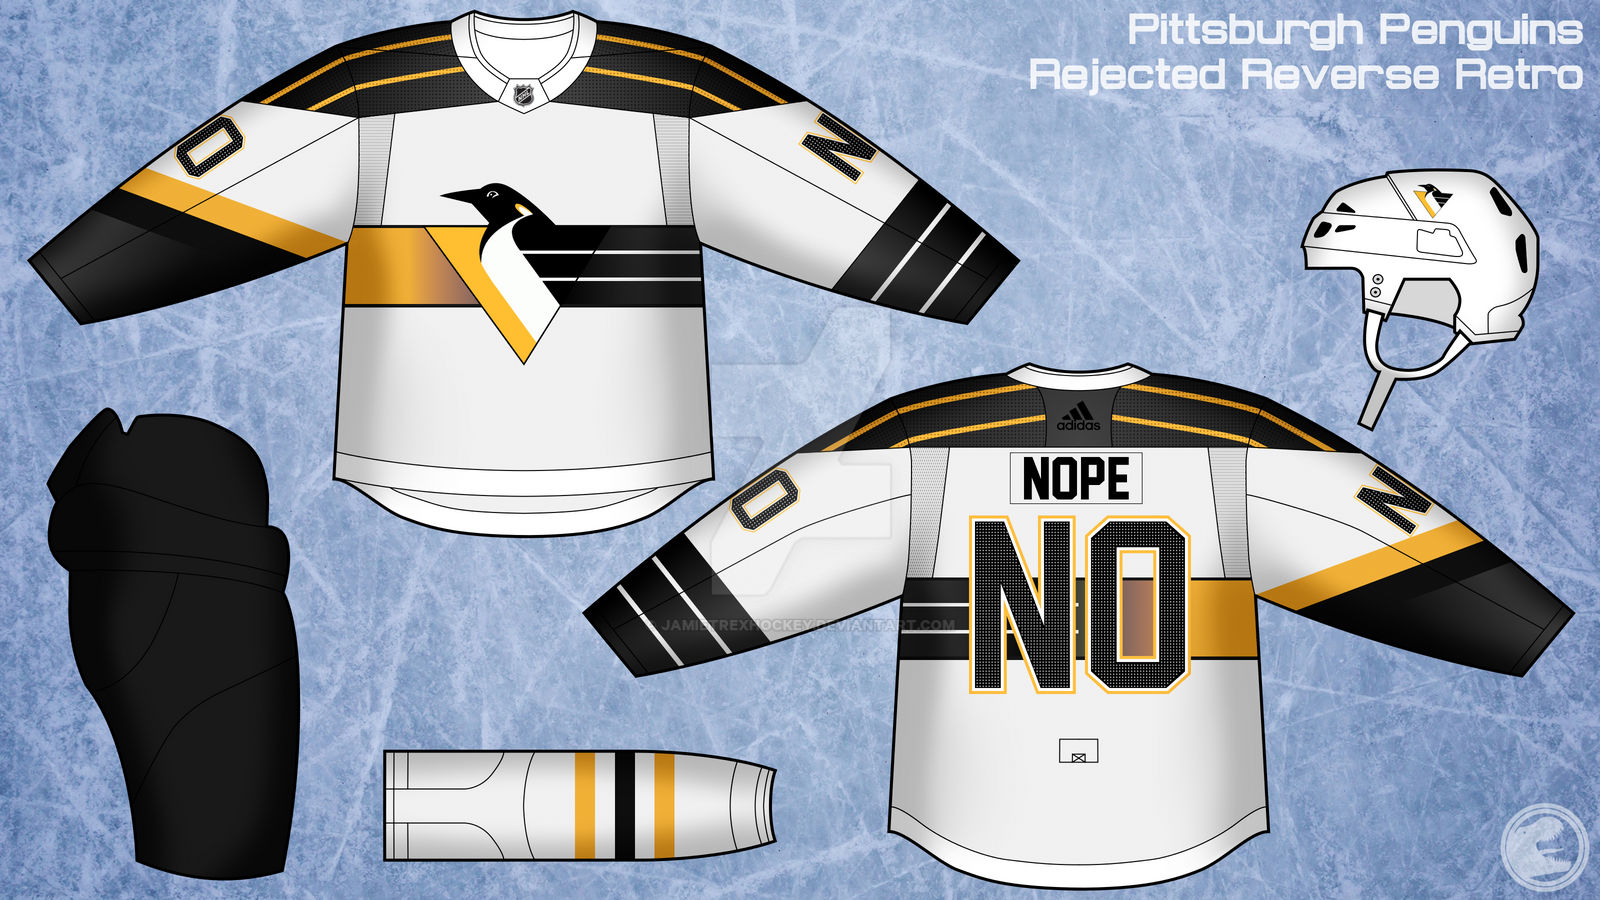 Reverse Retro jerseys are modern takes on retro designs, but what